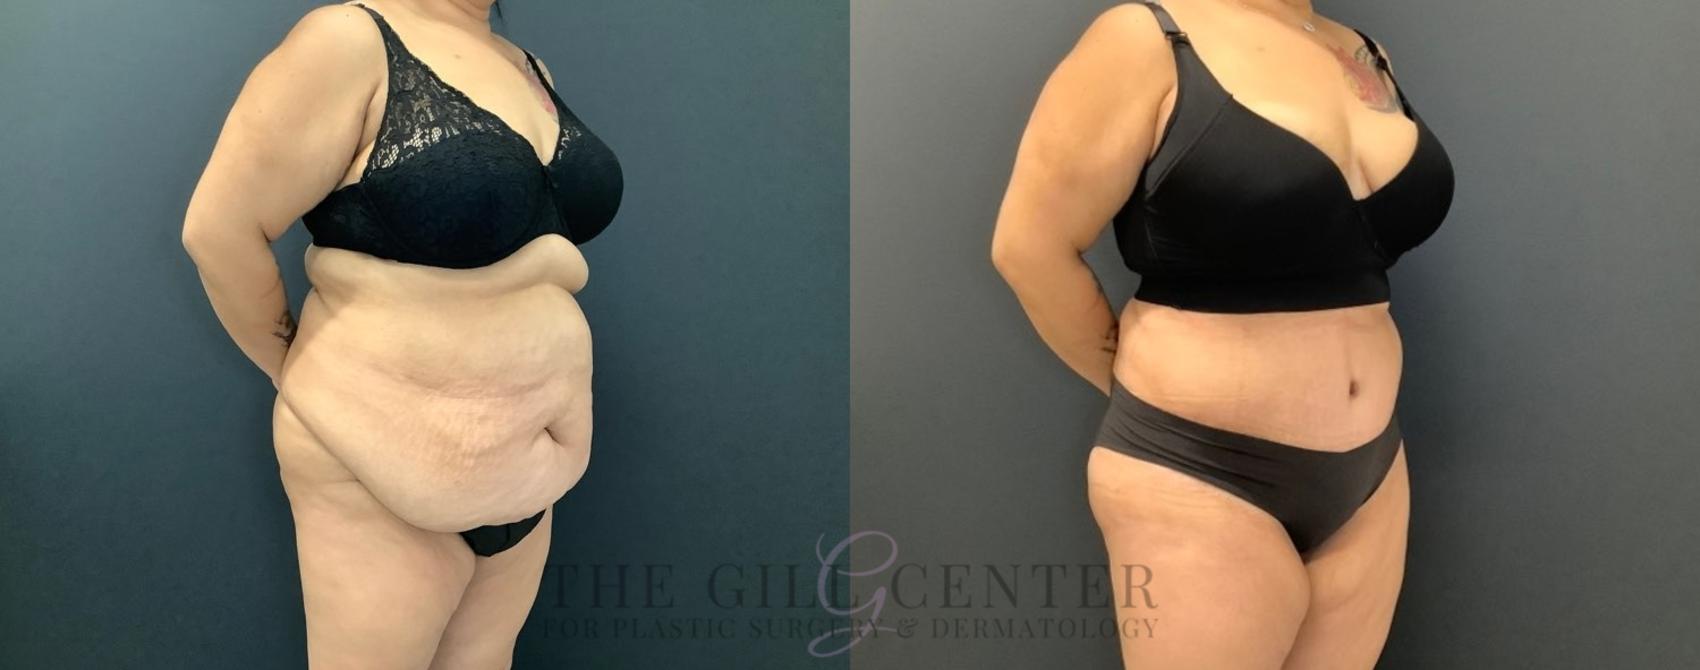 Tummy Tuck Case 458 Before & After Right Oblique | The Woodlands, TX | The Gill Center for Plastic Surgery and Dermatology